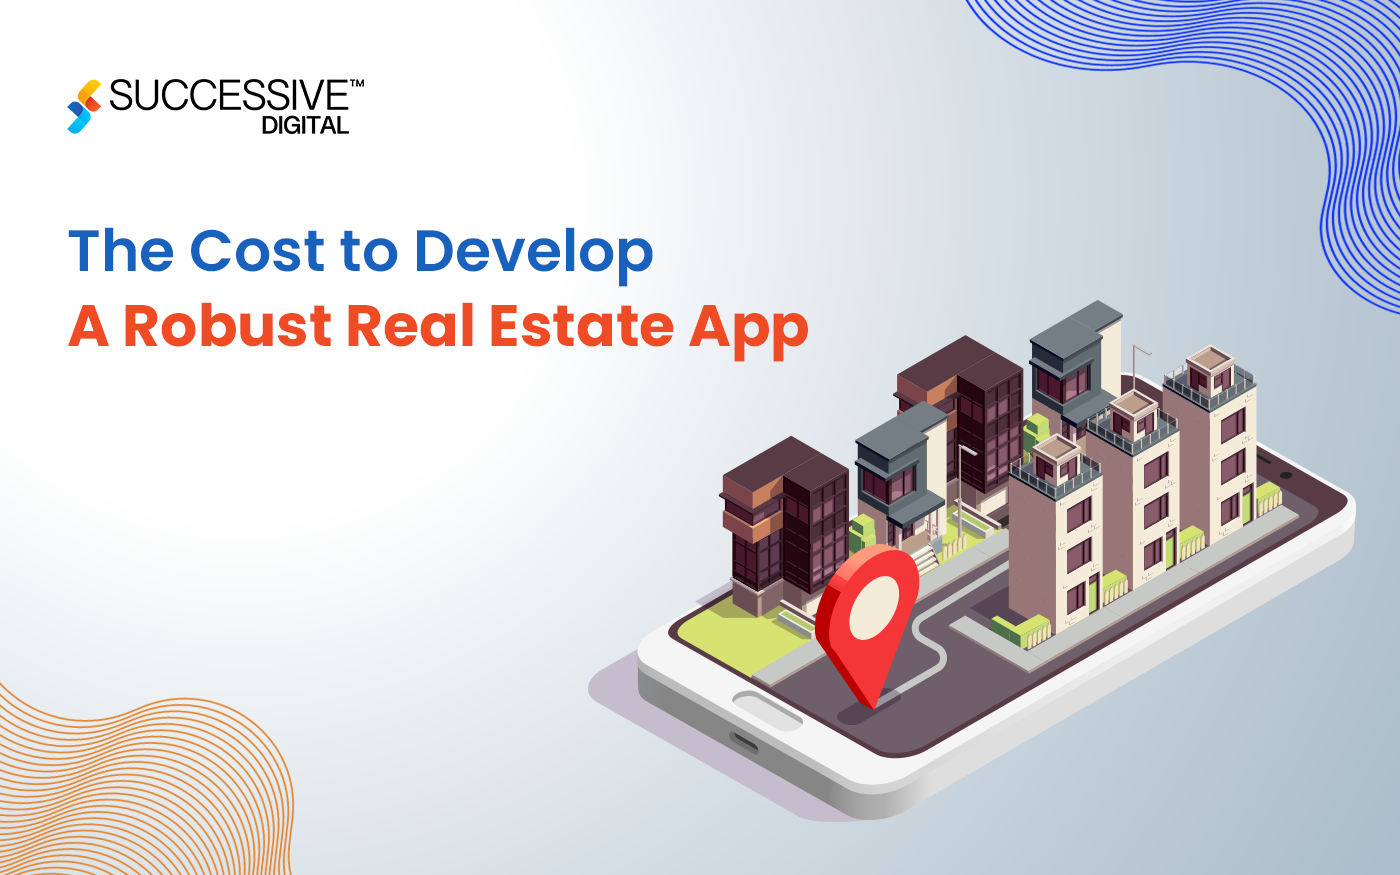 Understanding the Investment: The Cost to Develop a Robust Real Estate App